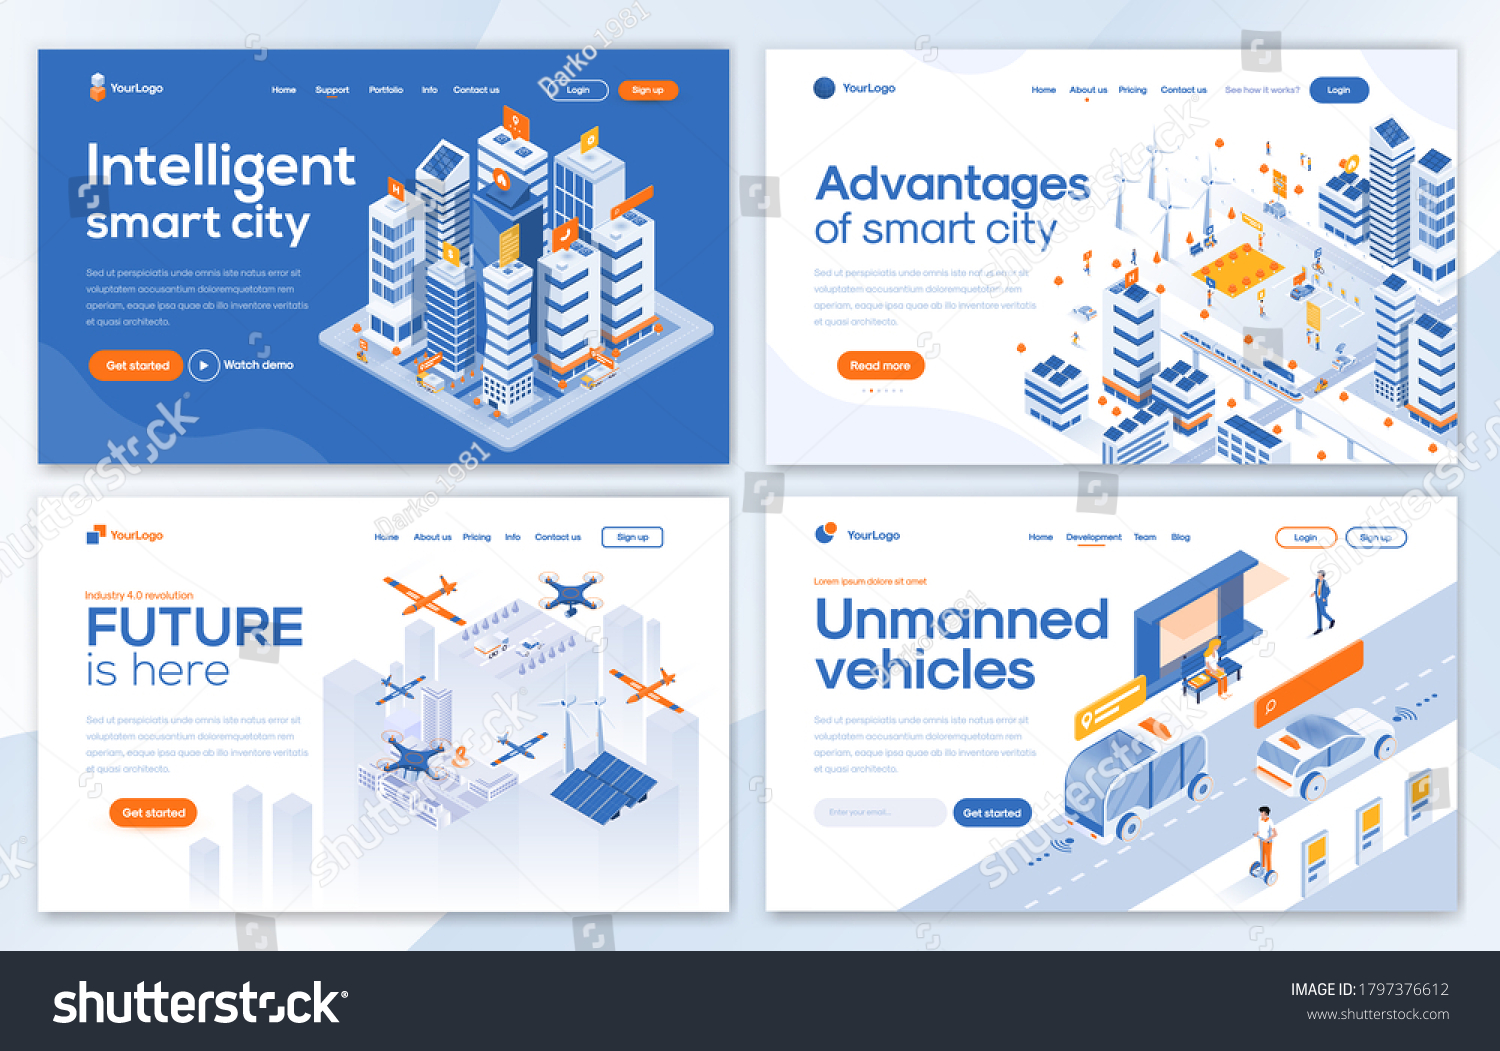 Set of Landing page design templates for Intelligent smart city, Advantages of smart city, Future is here and Unmanned vehicles. Easy to edit and customize. Modern Vector illustration concepts #1797376612